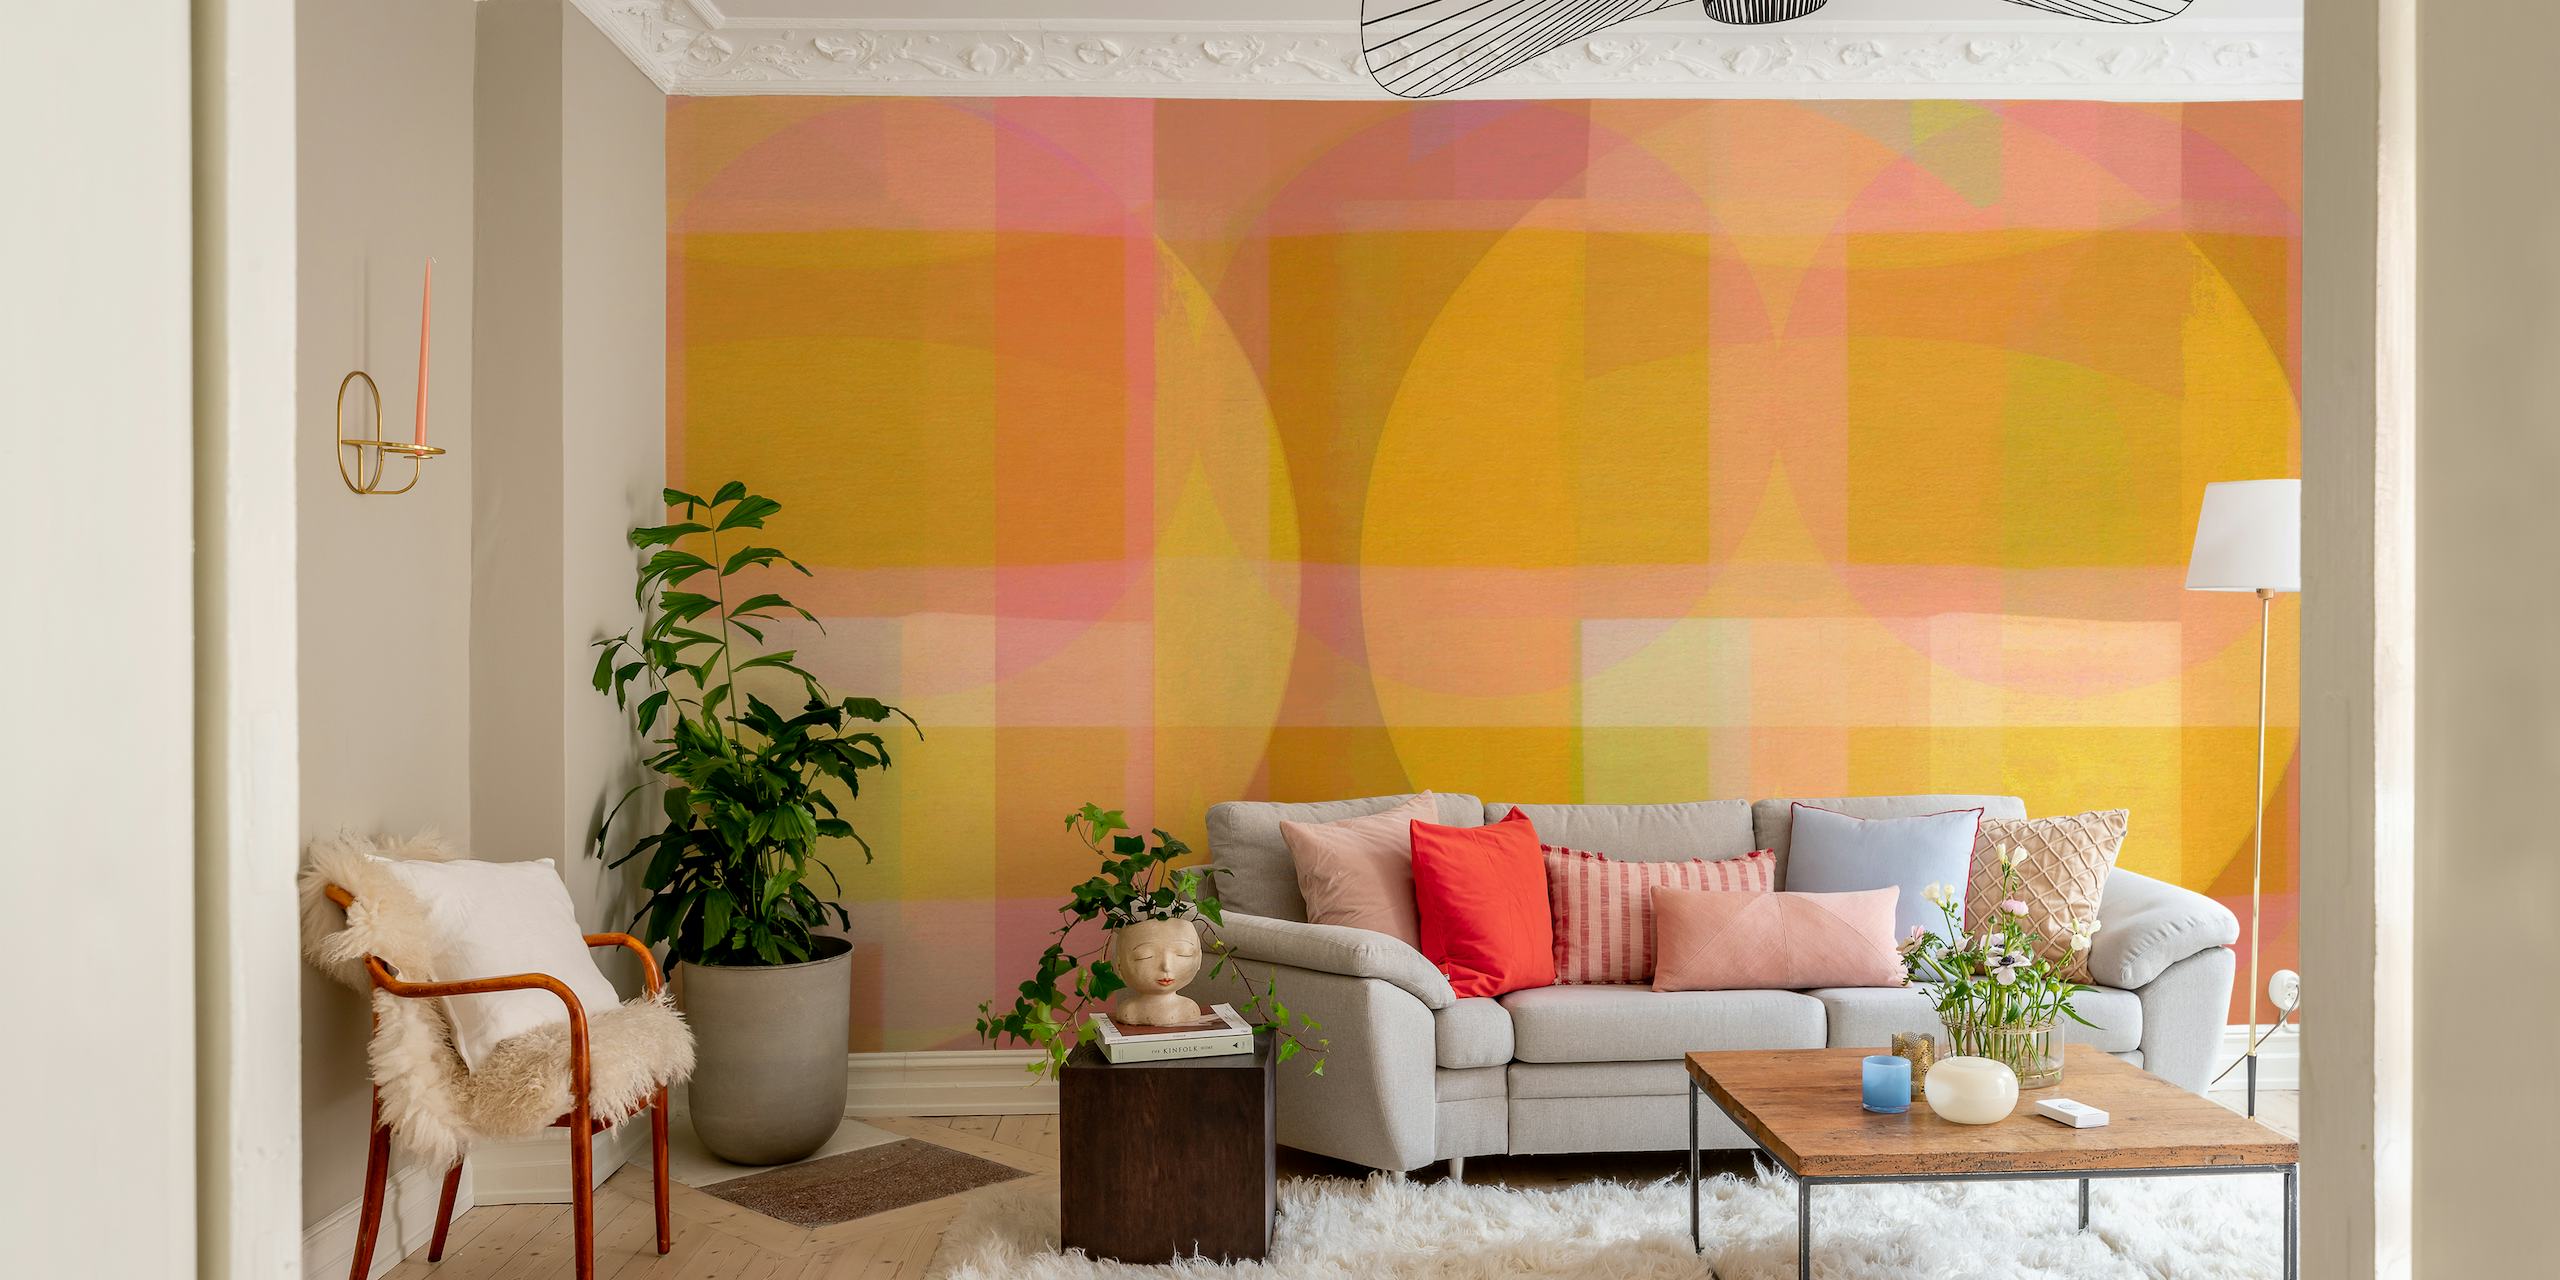 Abstract pastel Bauhaus-style wall mural with geometric shapes